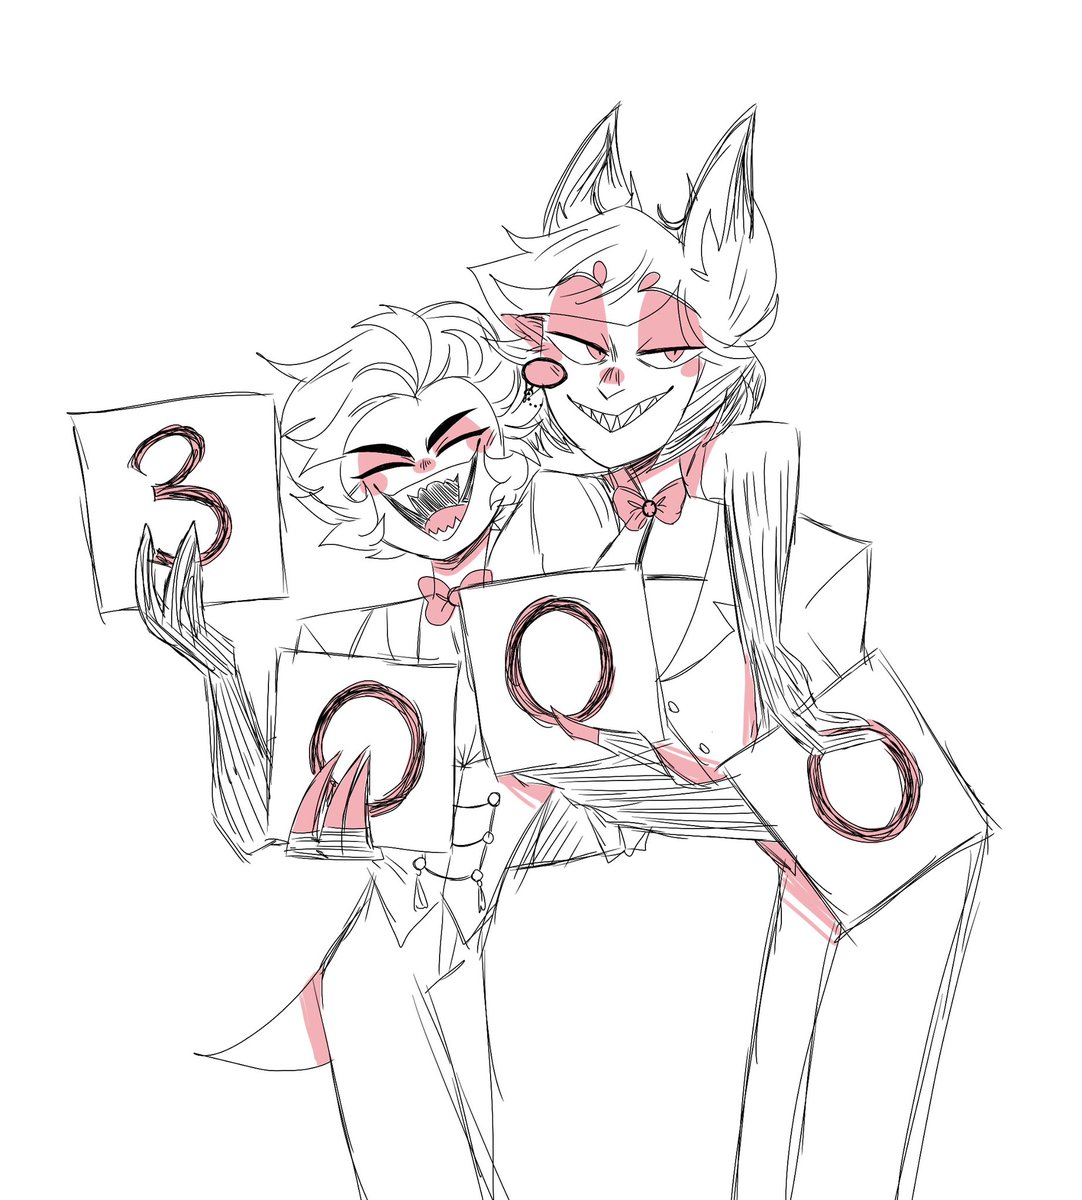 hi guys! i’m feeling a tiny bit better, still trying to resolve some relationship stuff but I really really wanted to say thank you for 3K!! as someone who used to think hitting 50 was a big deal, it means a lot 😭😭💖💖